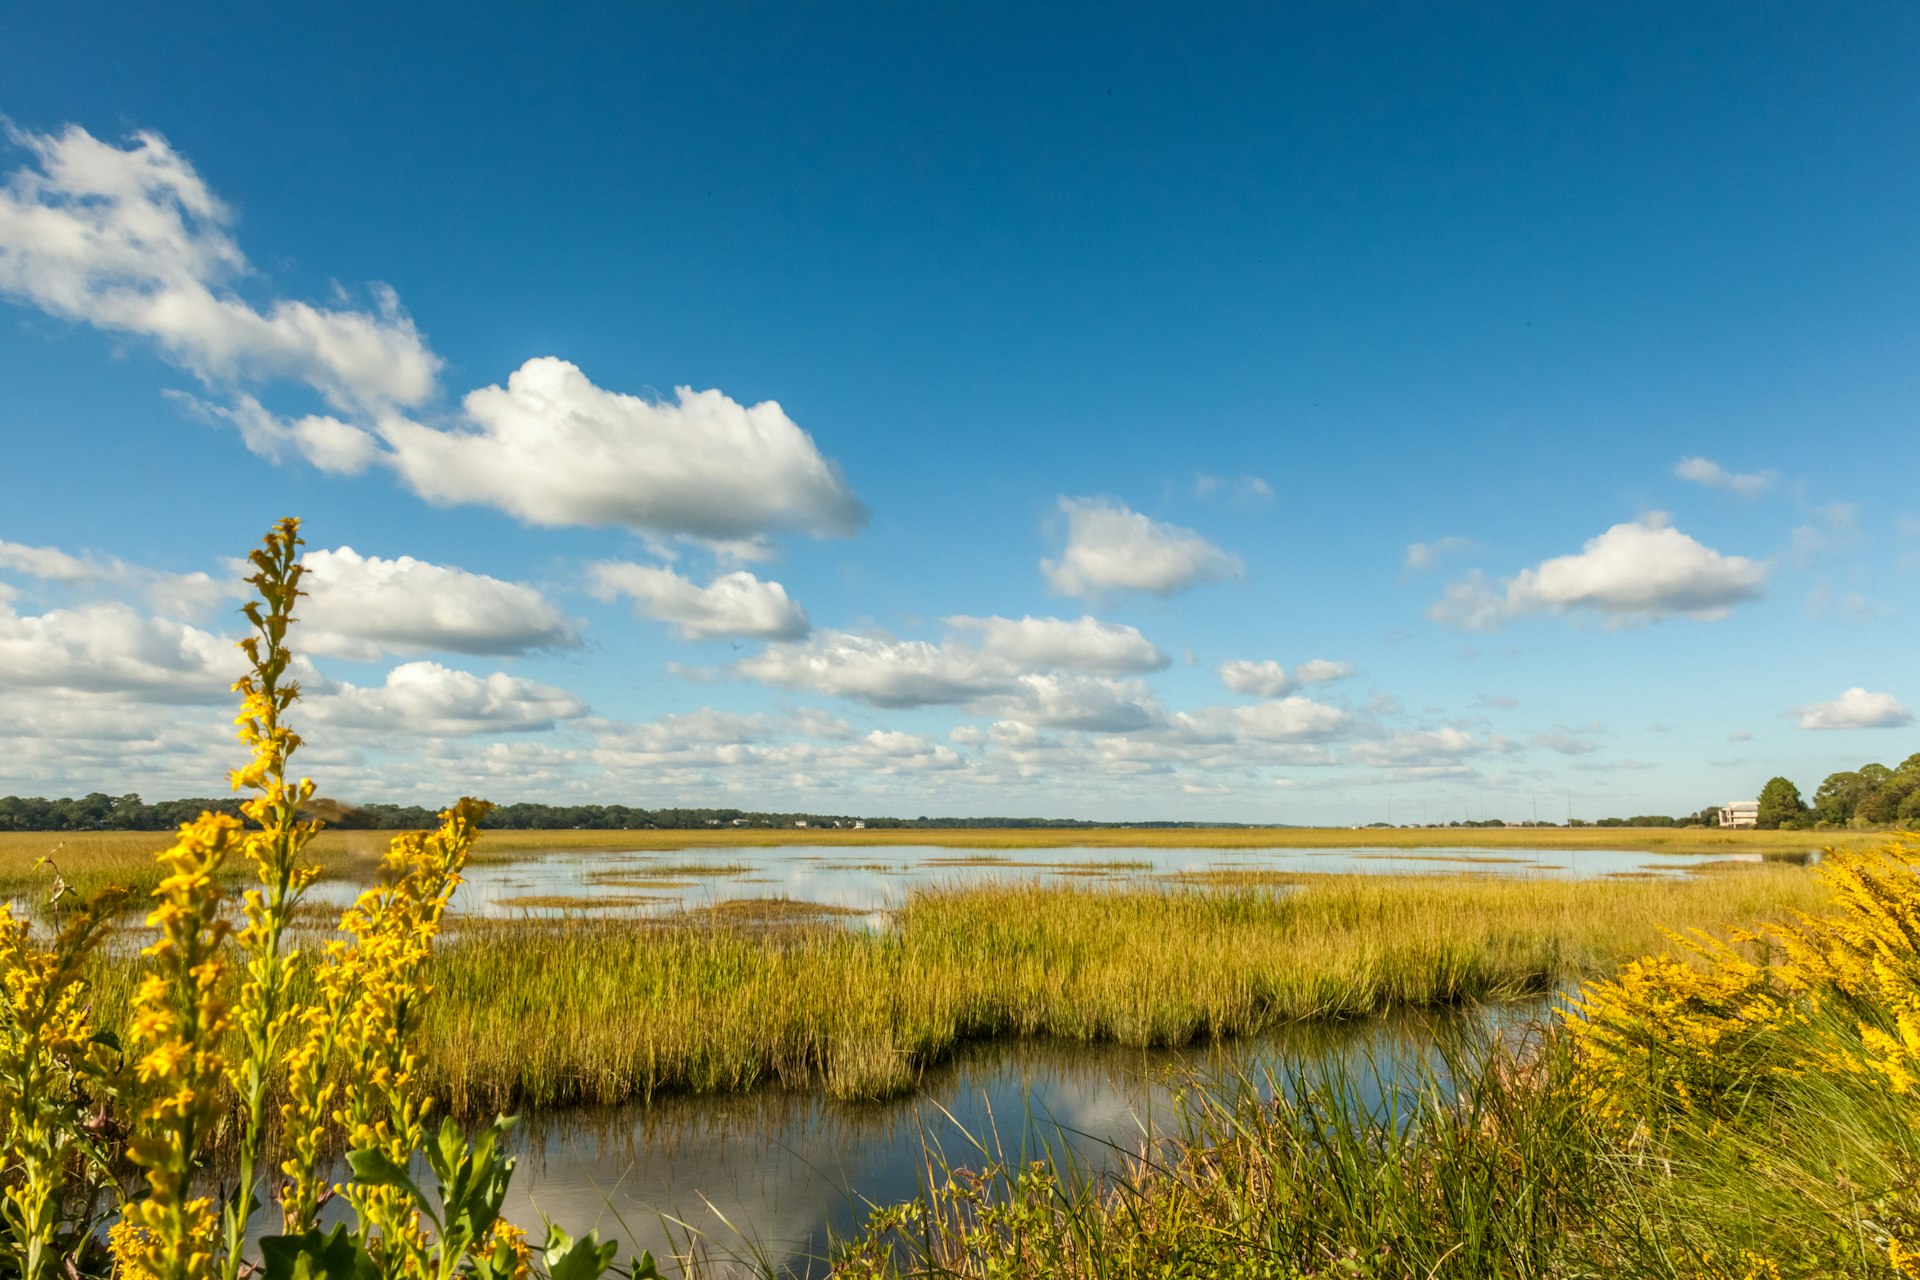 Coastal Georgia contains one third of the Atlantic Coast's saltwater marshes © BeachcottagePhotography / Getty Images